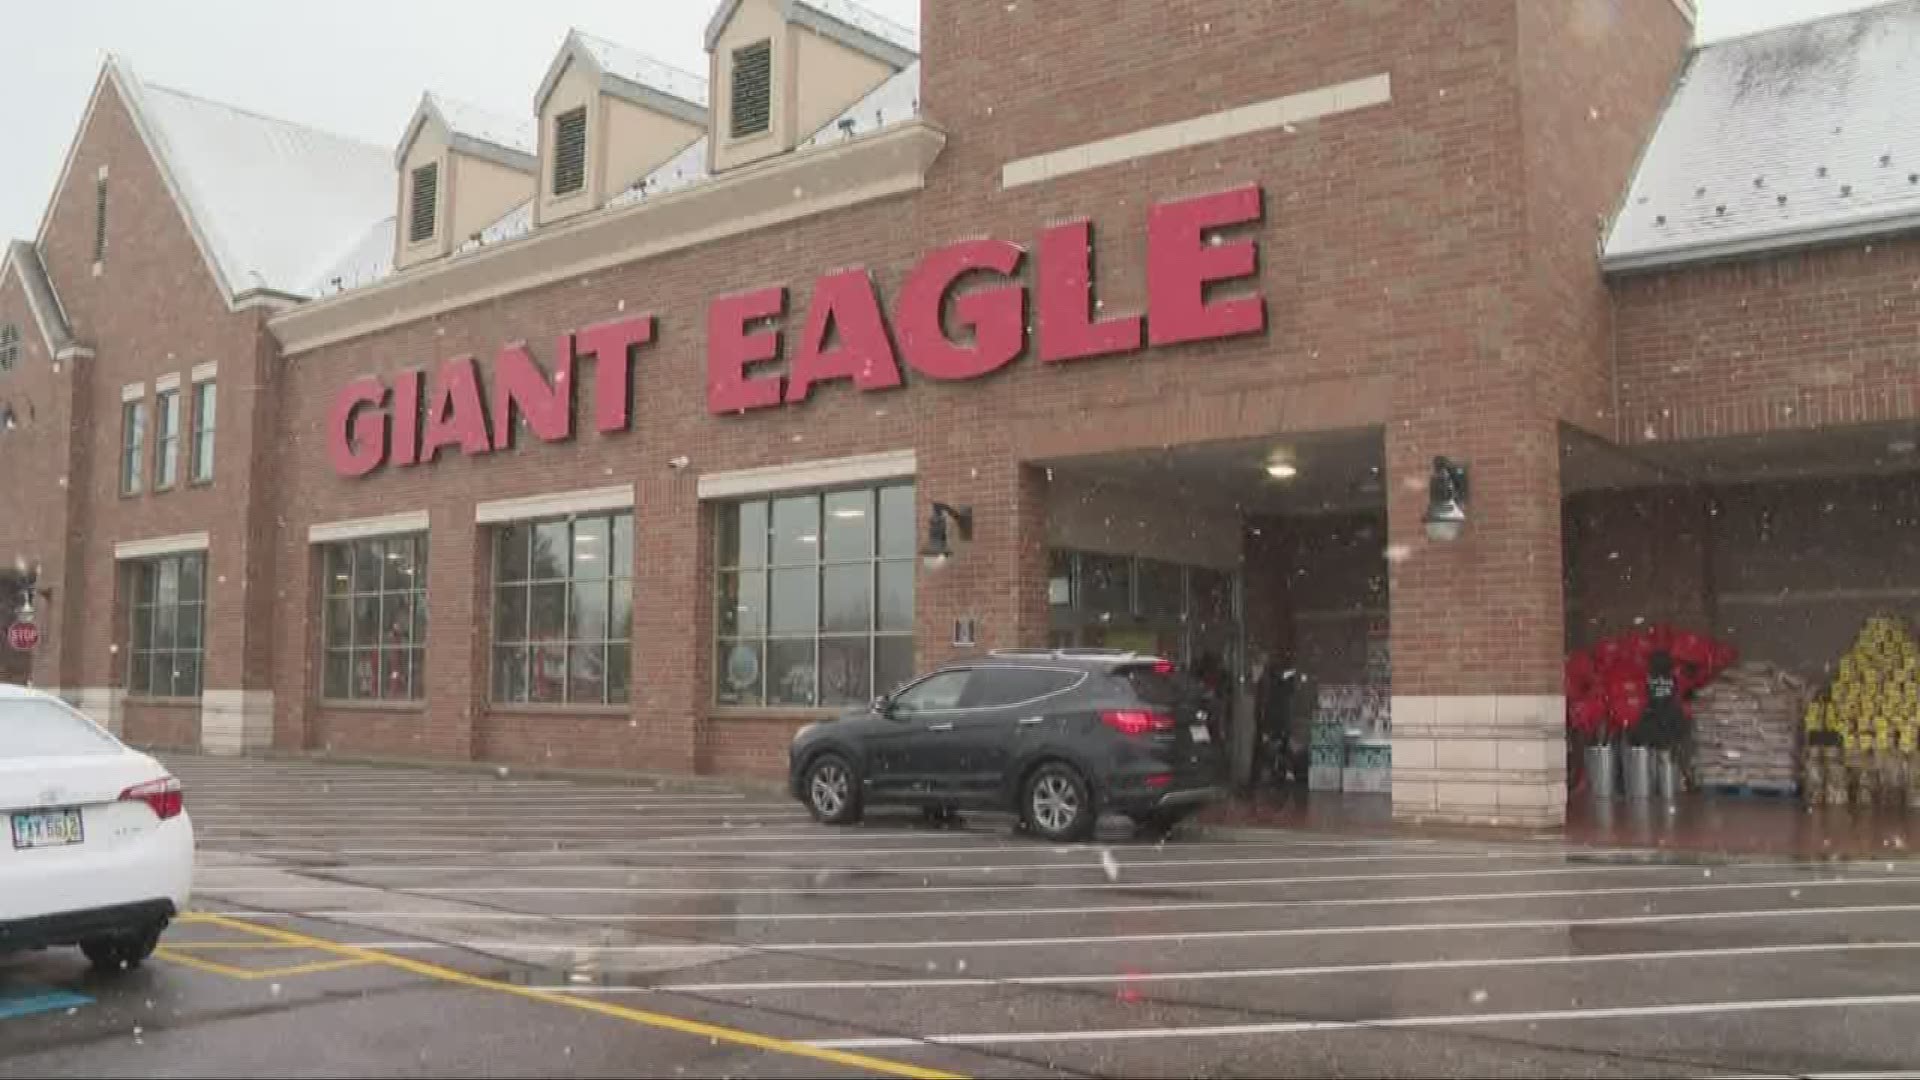 If you go shopping at any Giant Eagle store in Cuyahoga County, the plastic bag ban goes into effect on Wednesday. The county has delayed enforcement until July.